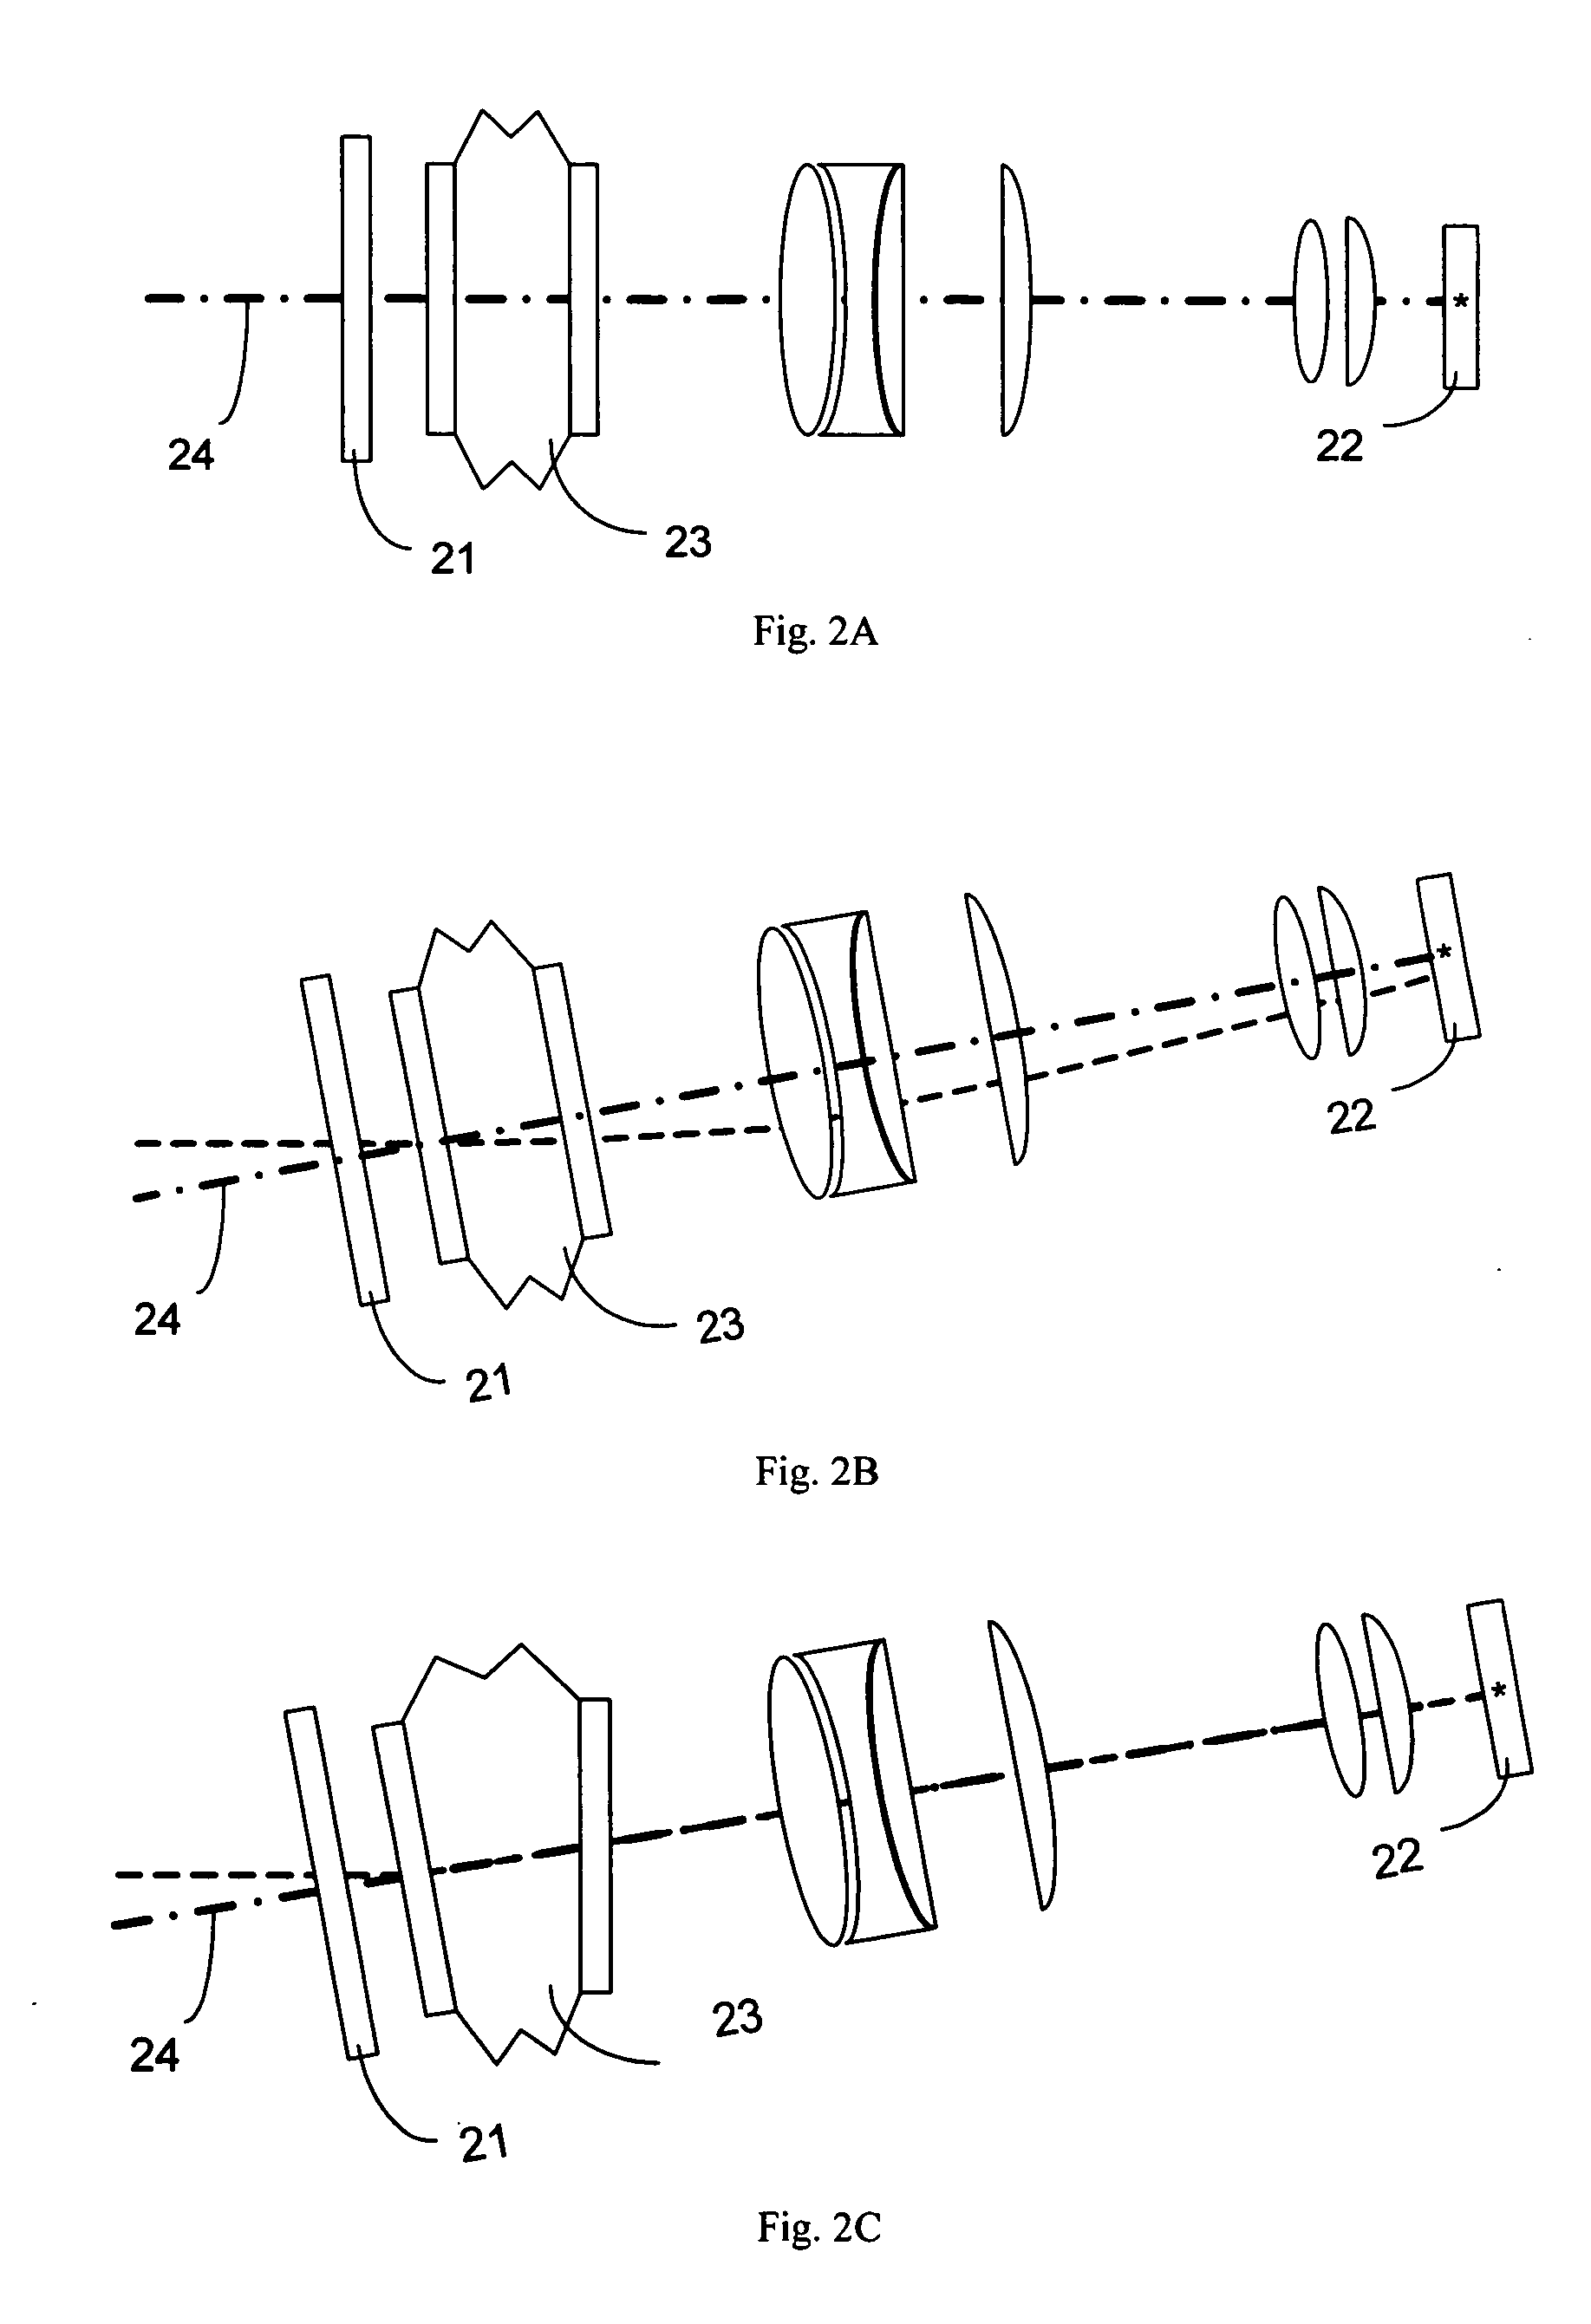 Imaging stabilizer using micromirror array lens